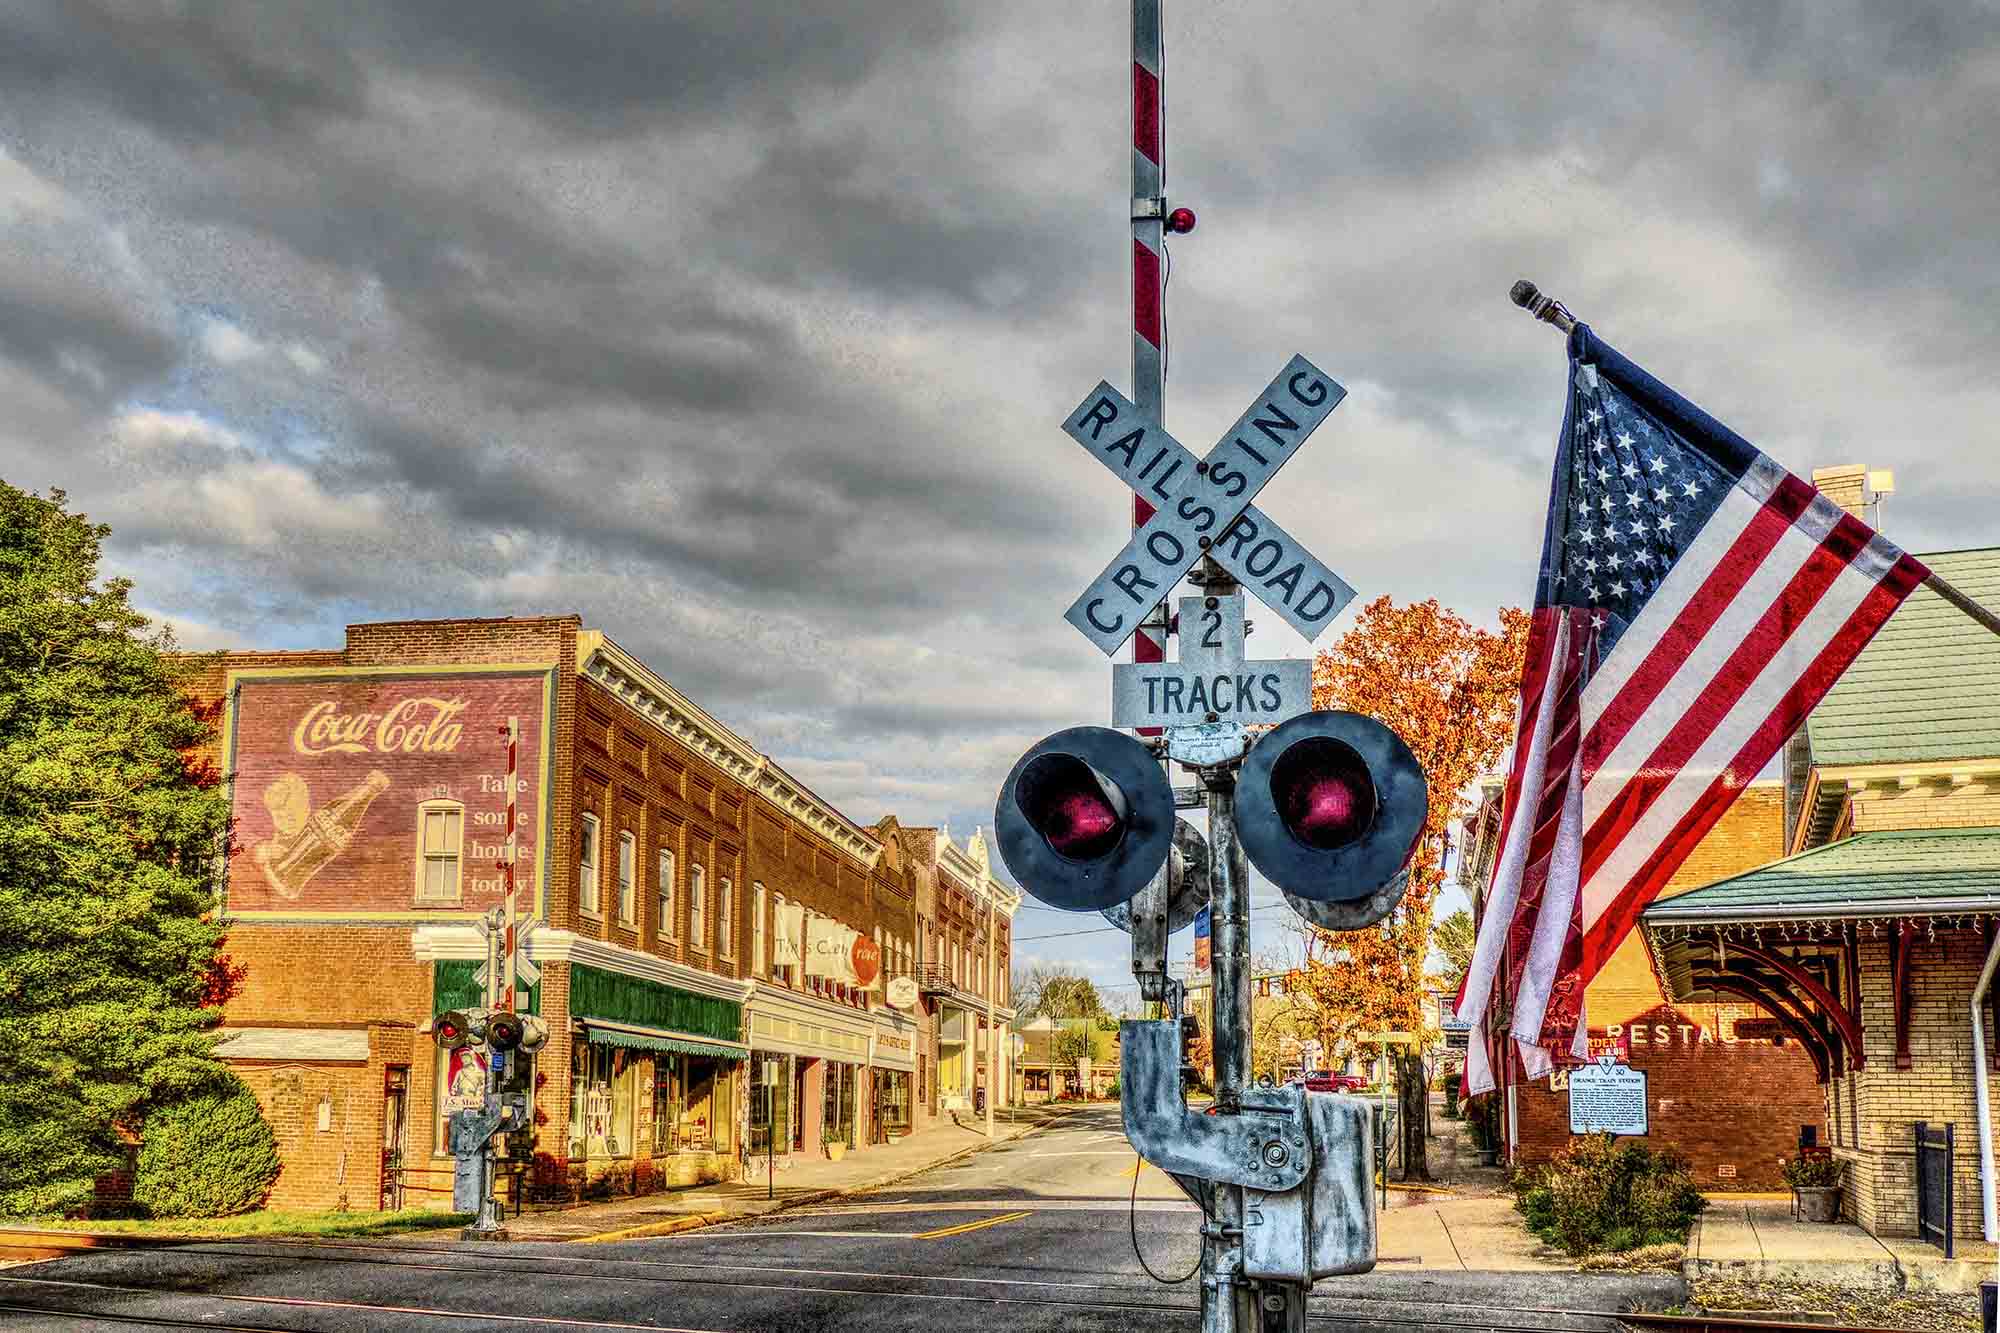 Railroad crossing sign in an old part of Charlottesville with an American flag next to the crossing